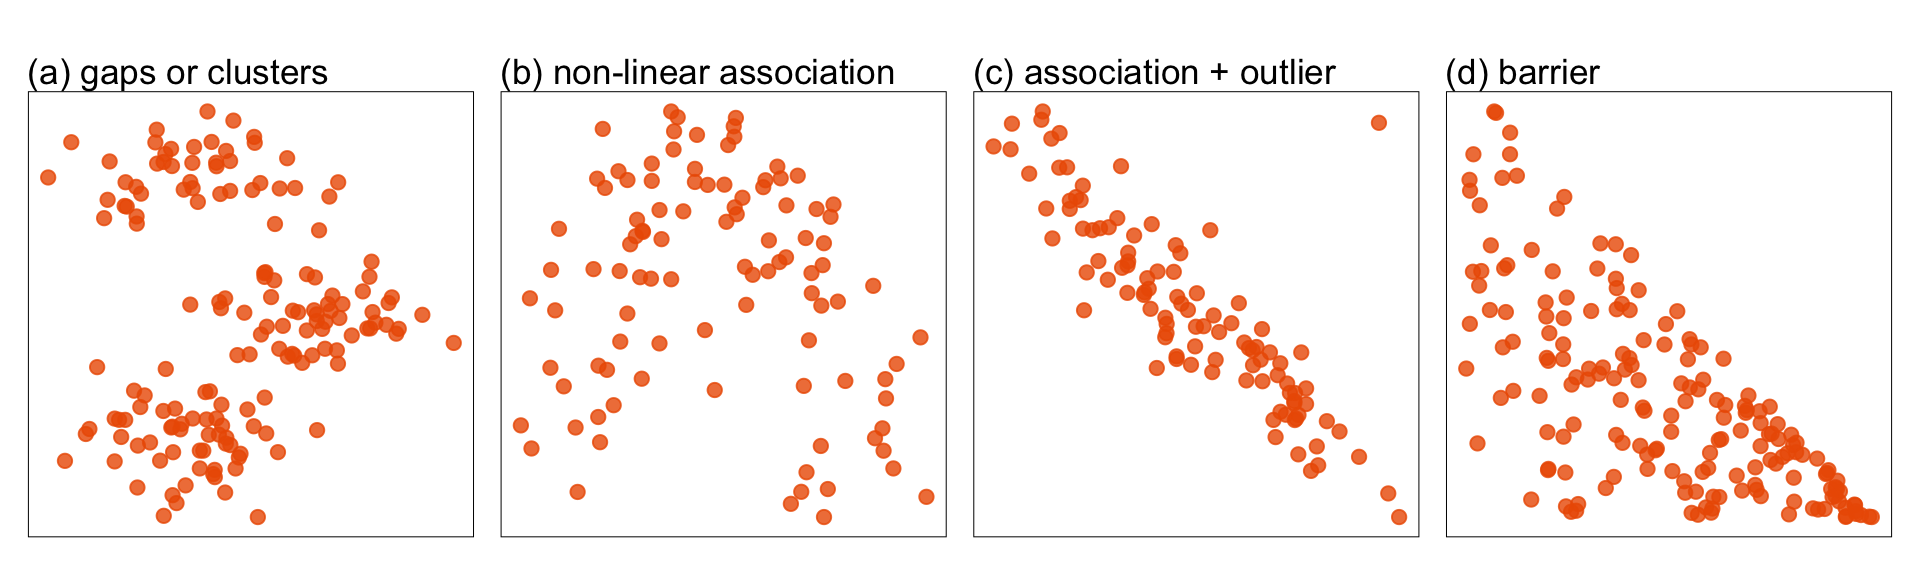 Four scatterplots showing different types of patterns you might expect to see. Plot (a) has three elliptical clusters of points, roughly lying horizontal, making a geese flying pattern. Plot (b) has a nonlinear pattern looking like a horseshoe. Plot (c) has a strong negative linear association and a single outlier in the top right. Plot (d) has points lying only in the bottom triangle.